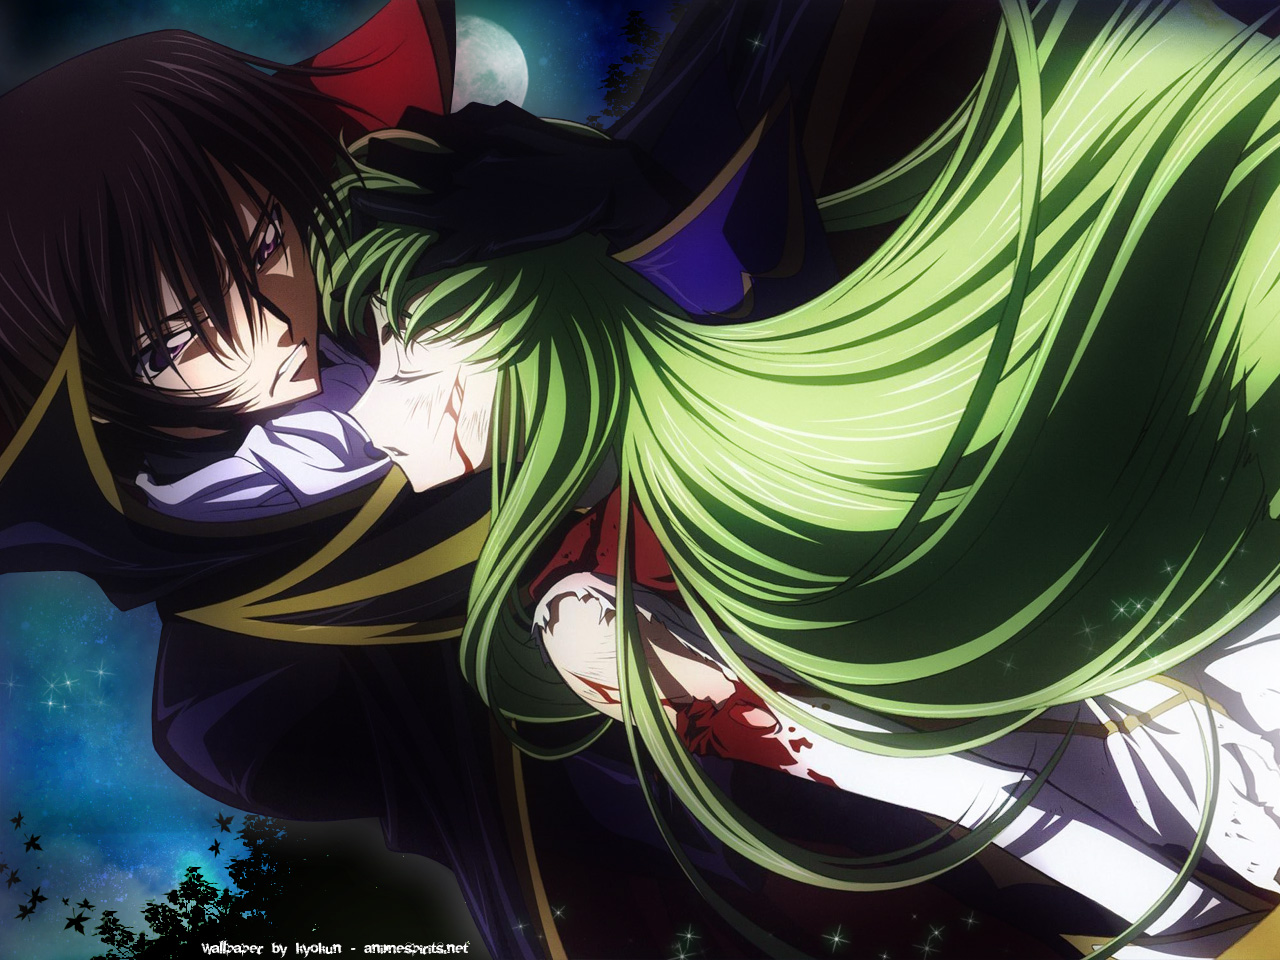 Free Download Code Geass Wallpaper 1280x960 Code Geass Lamperouge Lelouch Cc 1280x960 For Your Desktop Mobile Tablet Explore 47 Cc Wallpapers Awesome Wallpapers Cc Wallbase Hd Wallpapers Alpha Wallpaper Cc